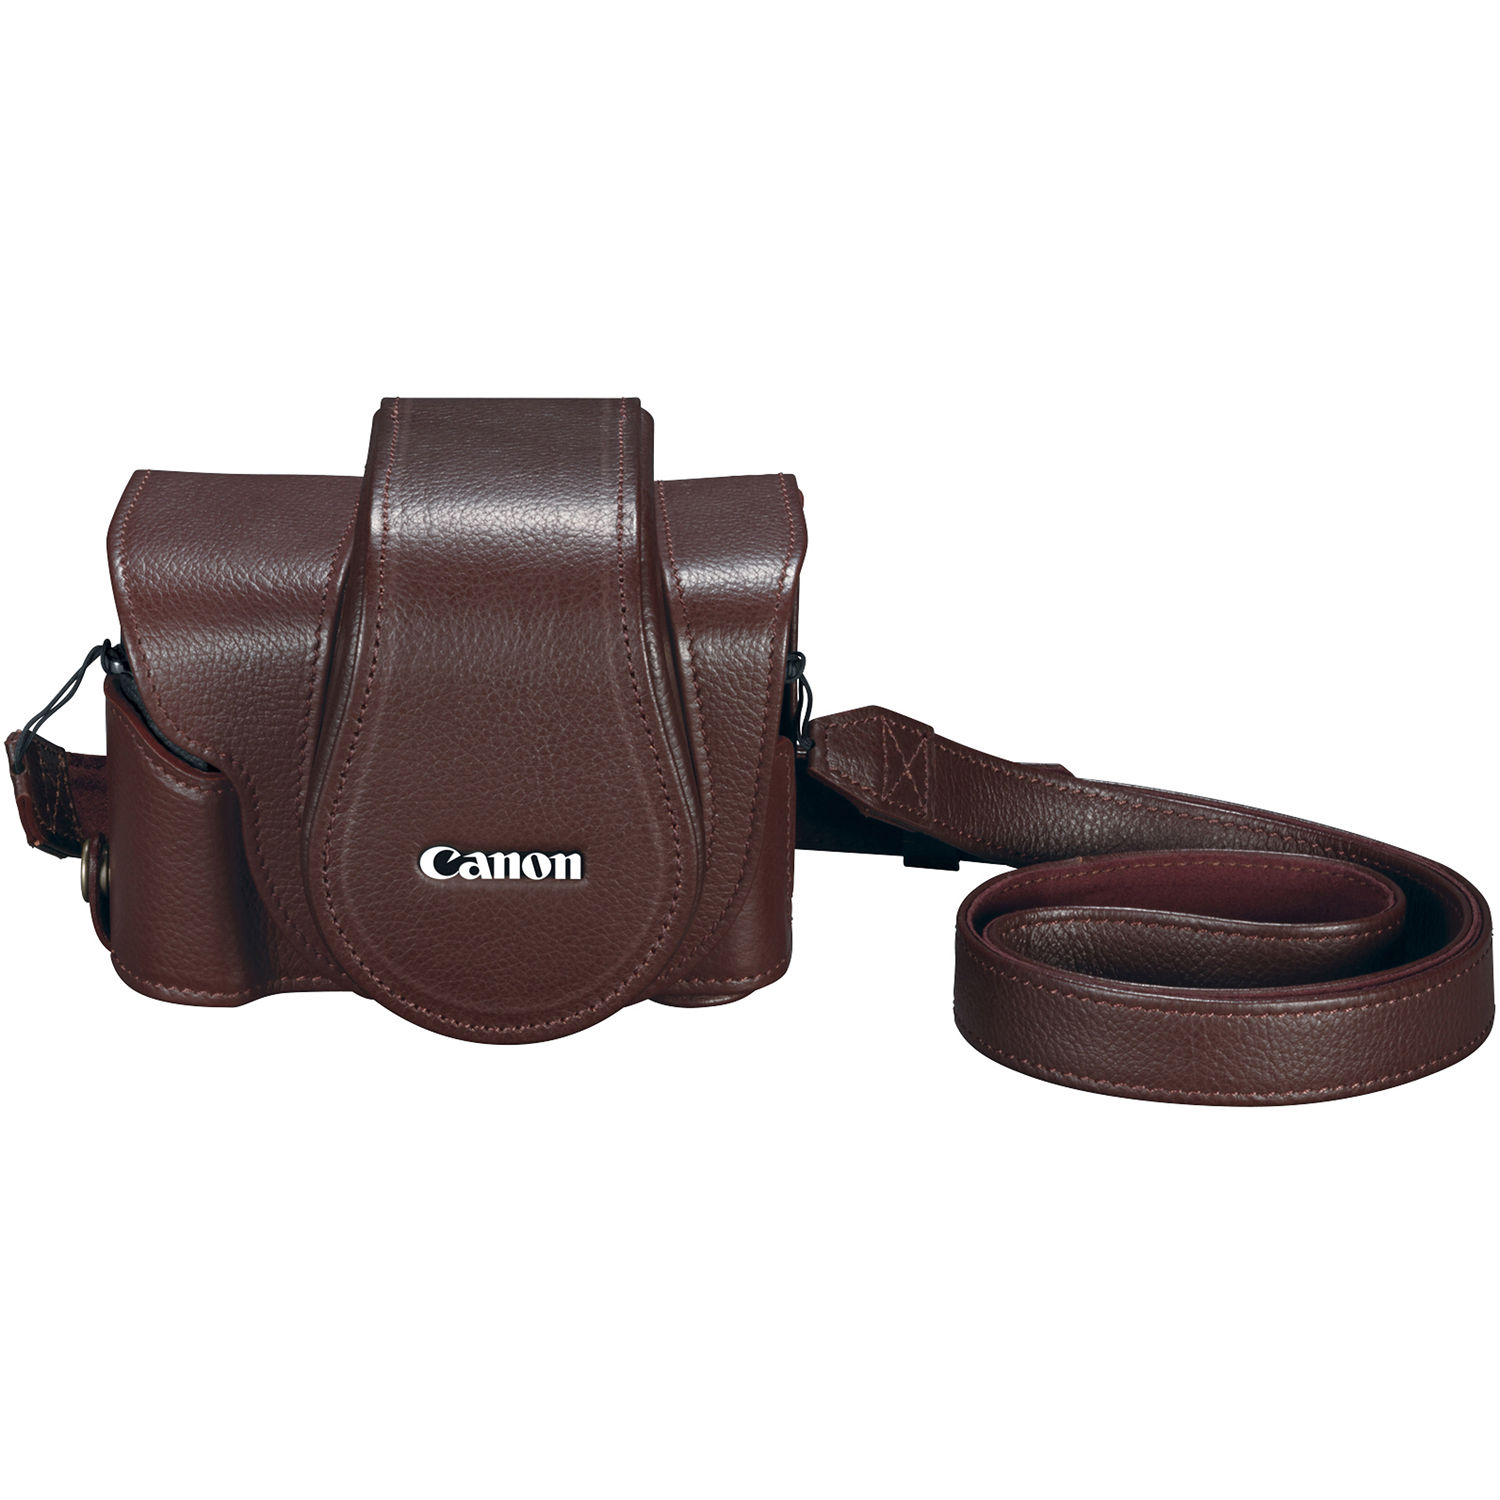 Canon Psc 6300 Deluxe Leather Case For Powershot G1 X 3087c001